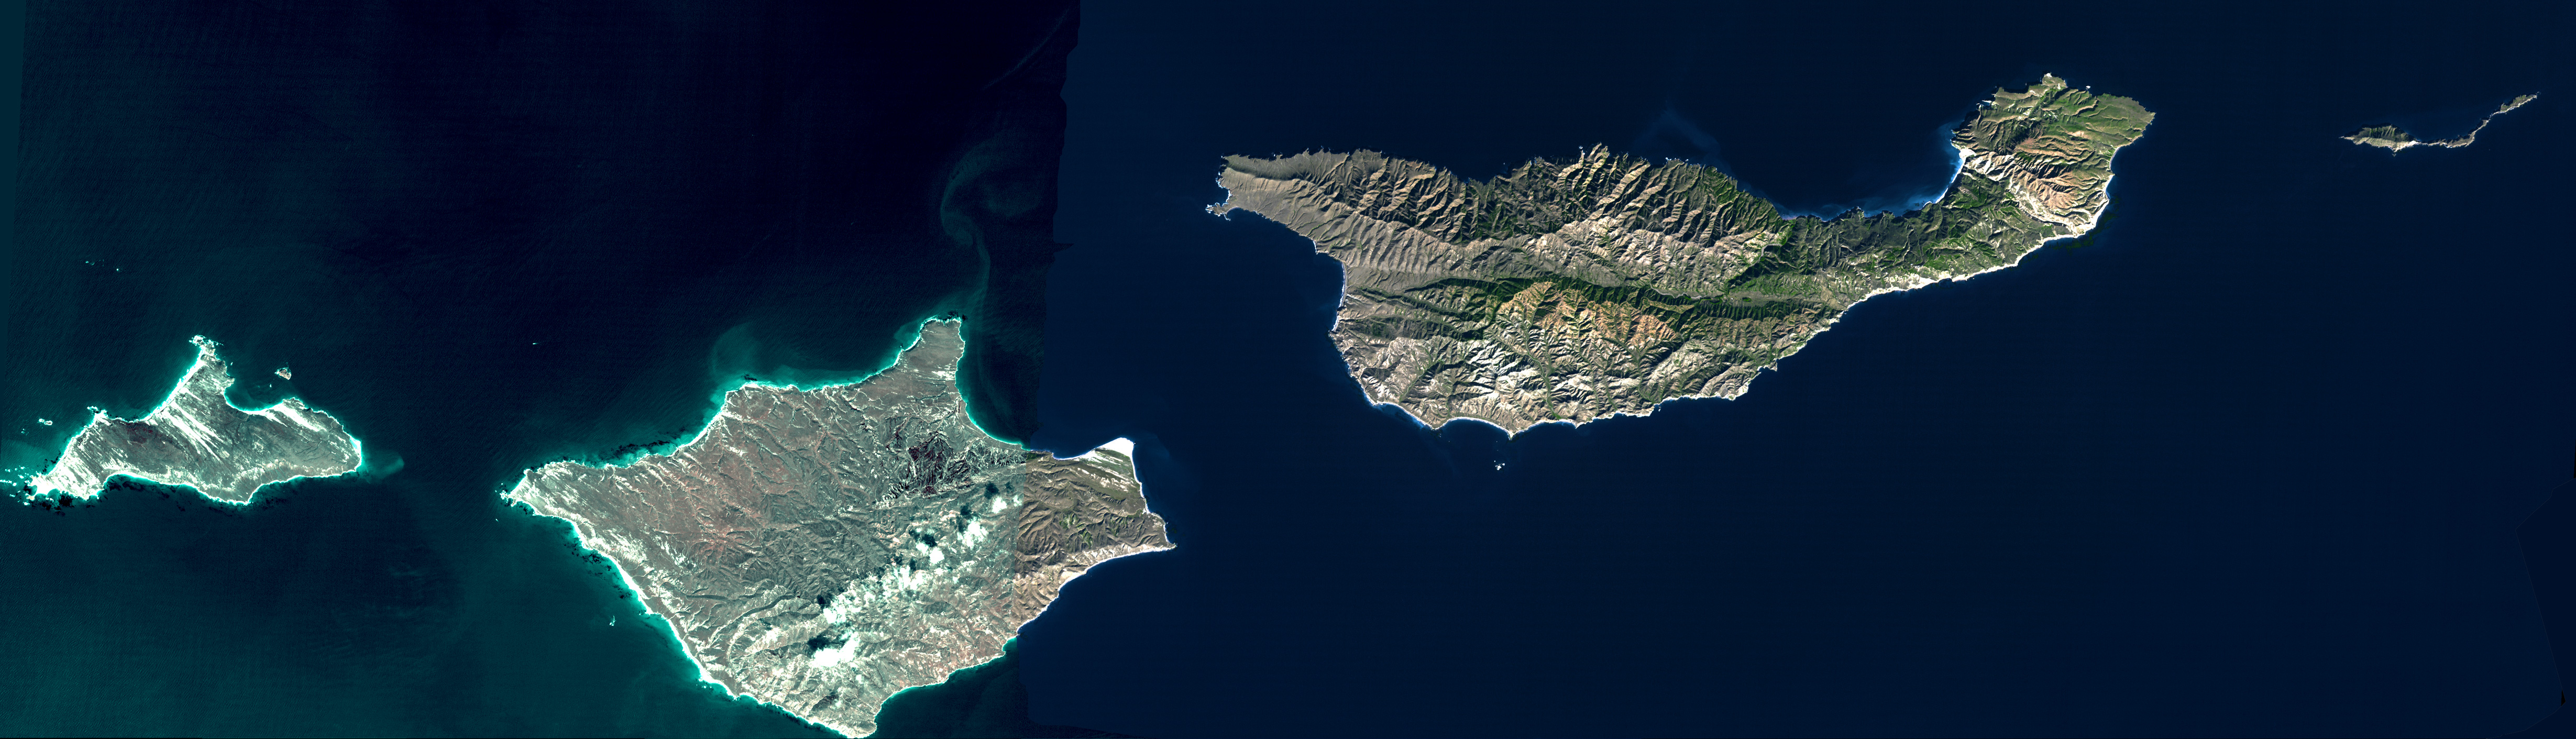 California’s Channel Islands - related image preview